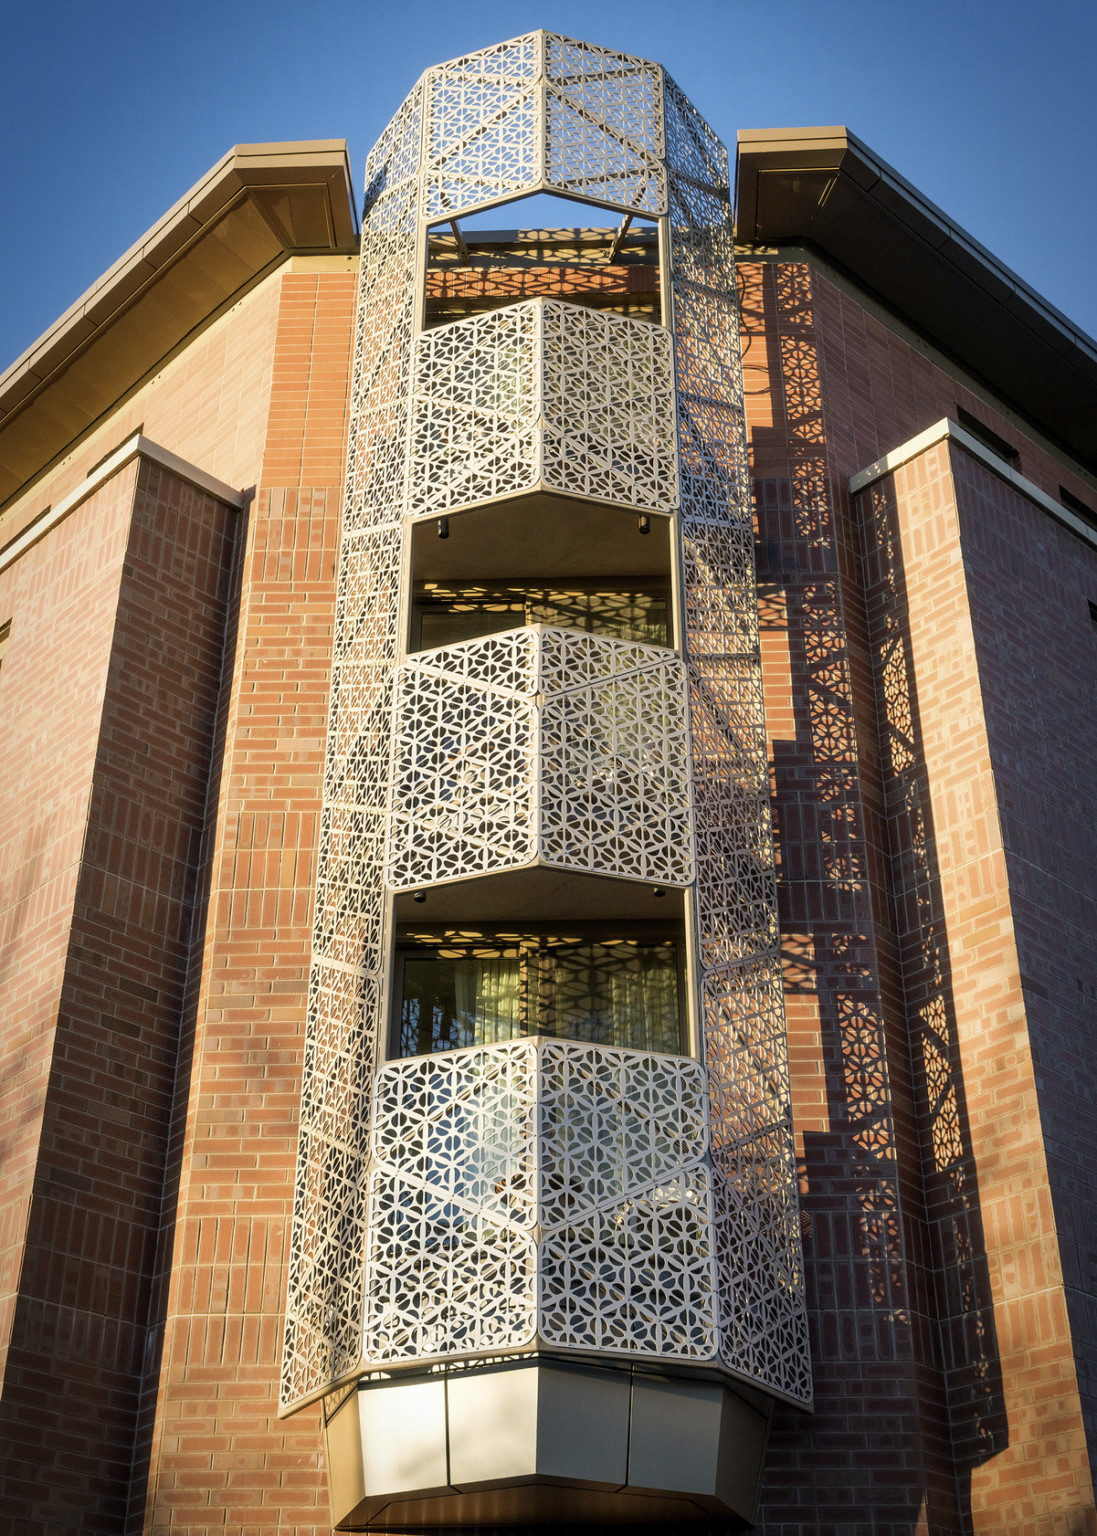 The metal with organic cutouts wraps around 3 exterior corner balconies as bannisters and multistory tower on brick building